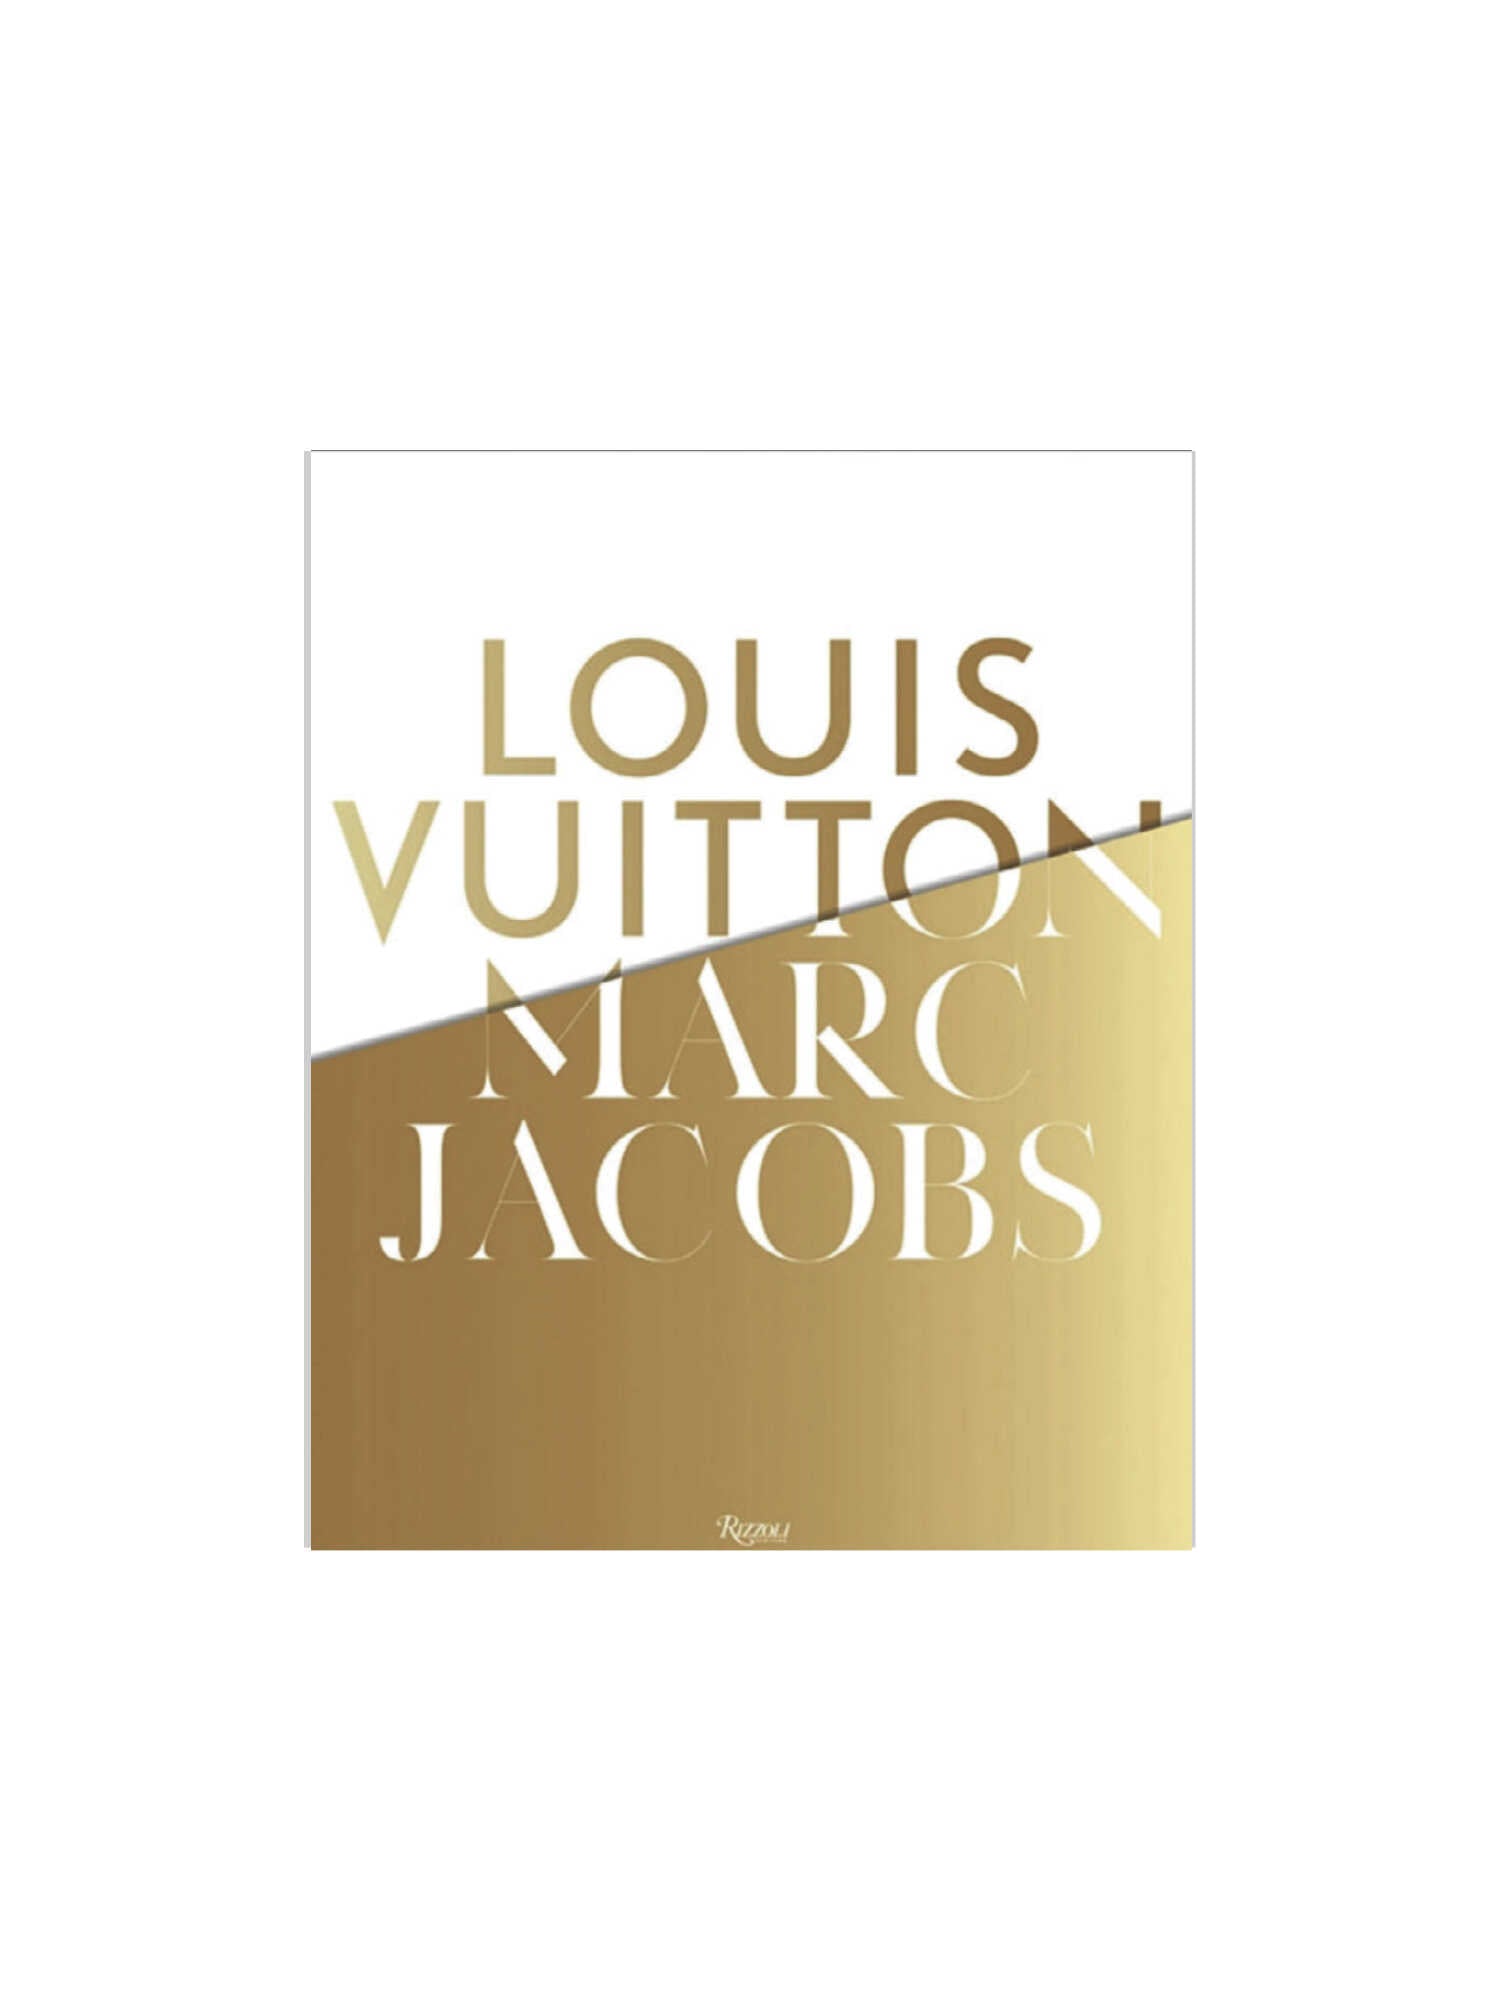 Coffee Table Book - Louis Vuitton & Marc Jacobs